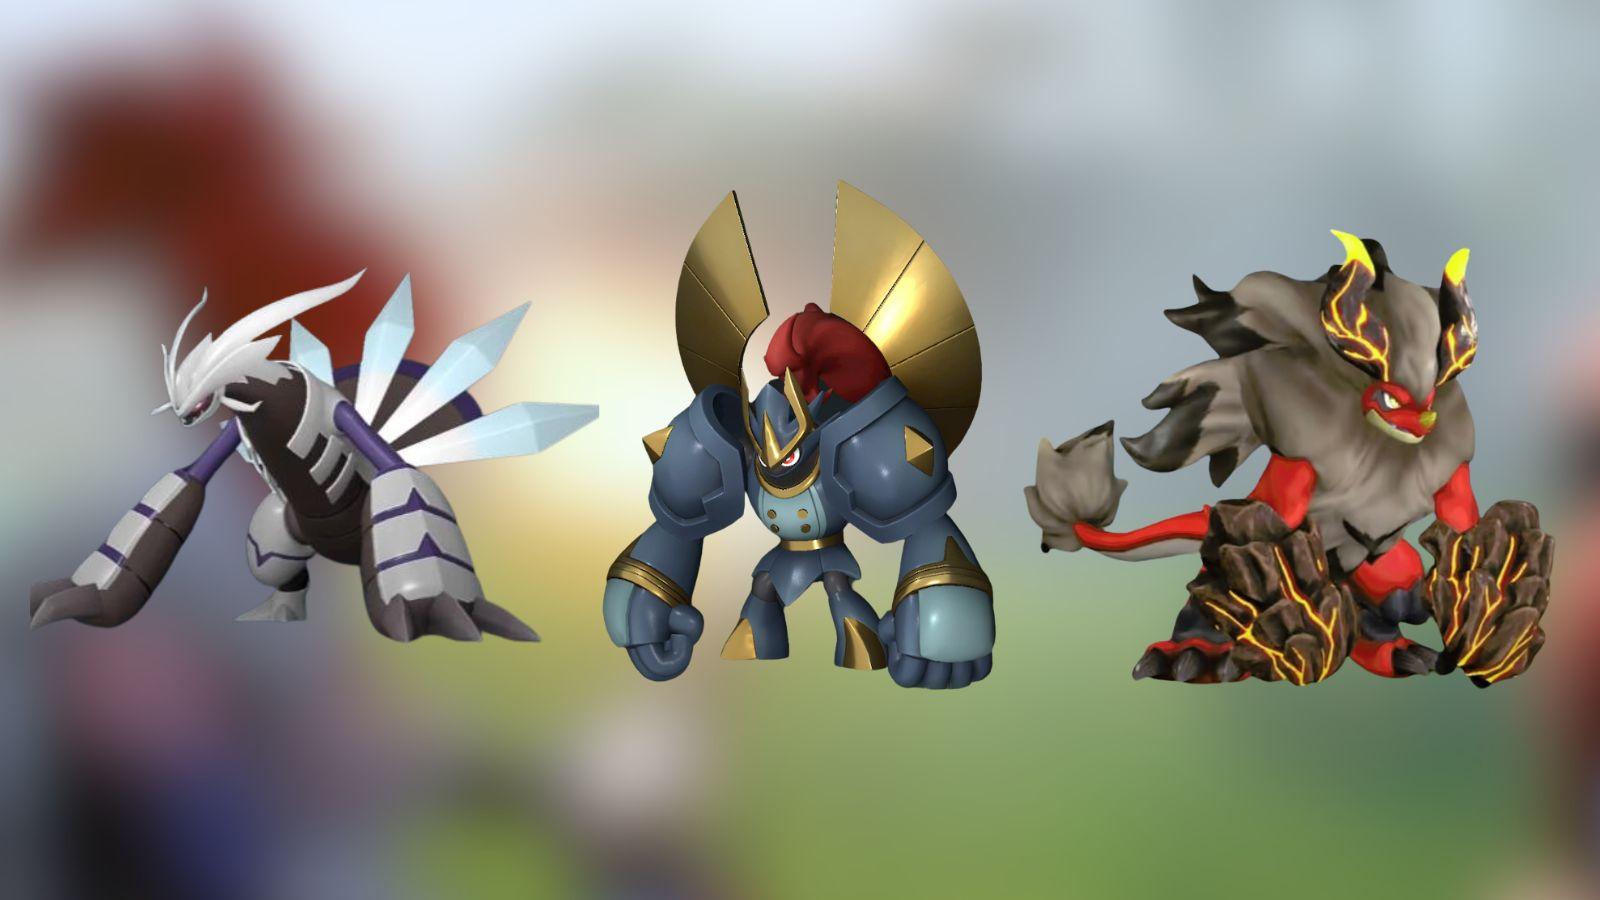 A custom image of the best Pals for mining in Palworld featuring Xenogard, Knocklem, and Blazamut.